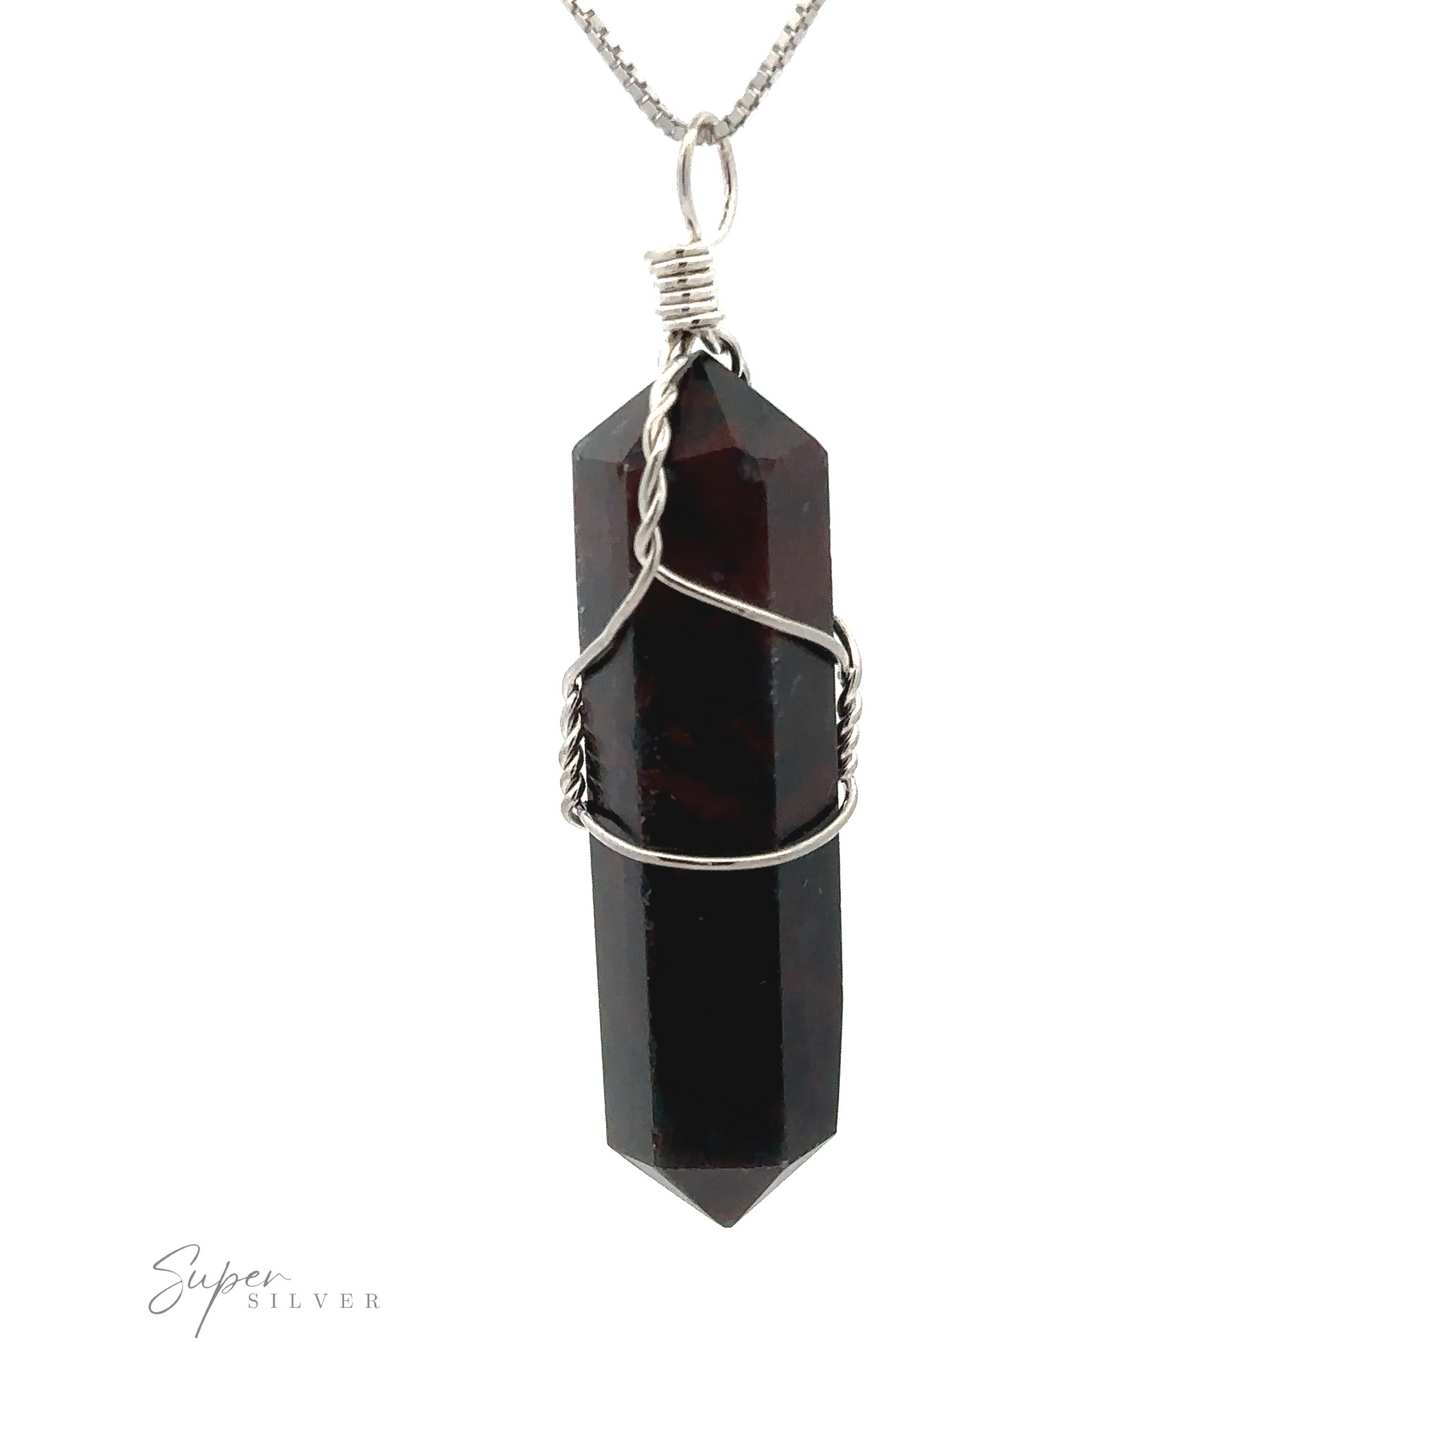 
                  
                    A Wire Wrapped Stone Pendant hangs from a silver chain against a white background. The Wire Wrapped Stone Pendant is elongated with a pointed end.
                  
                